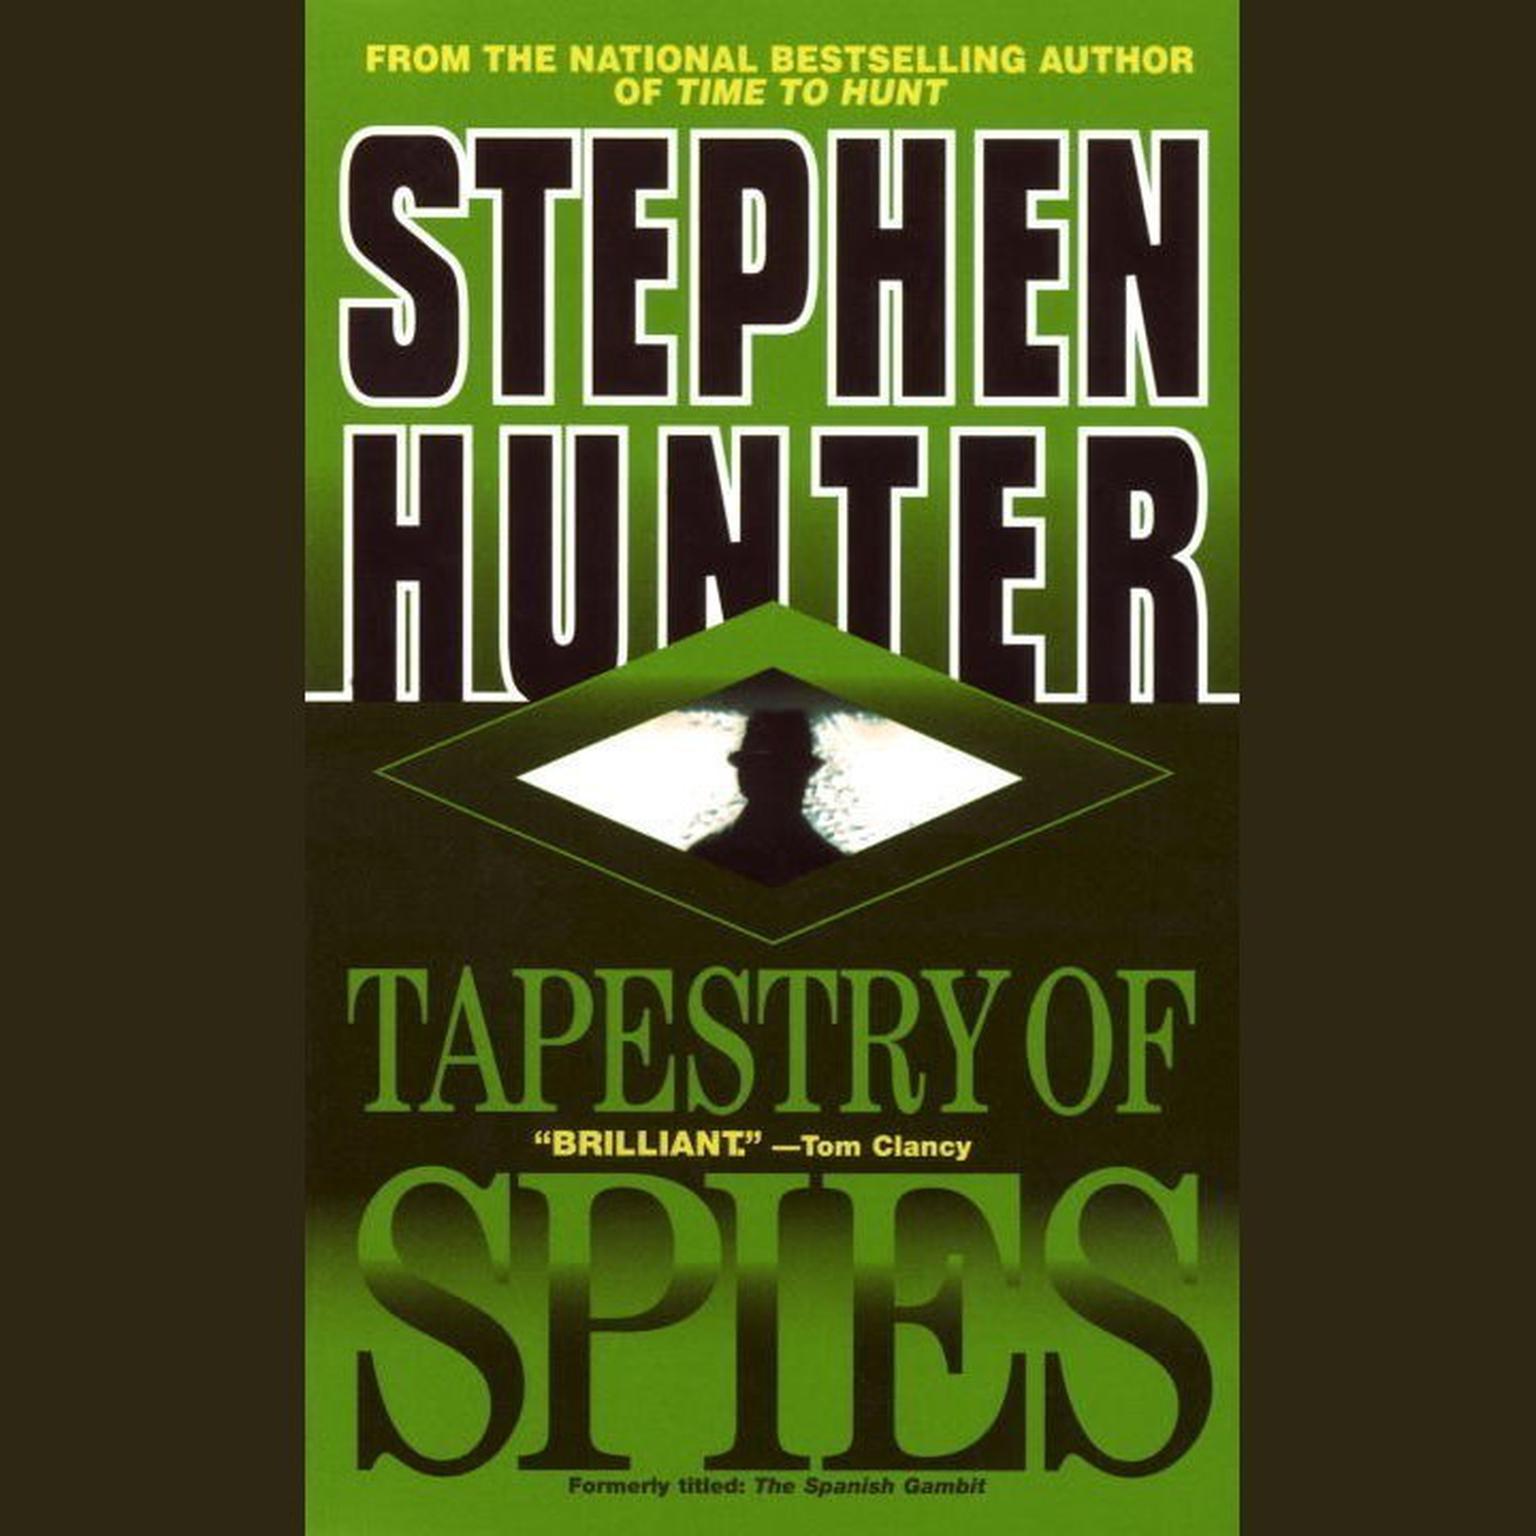 Tapestry of Spies (Abridged) Audiobook, by Stephen Hunter